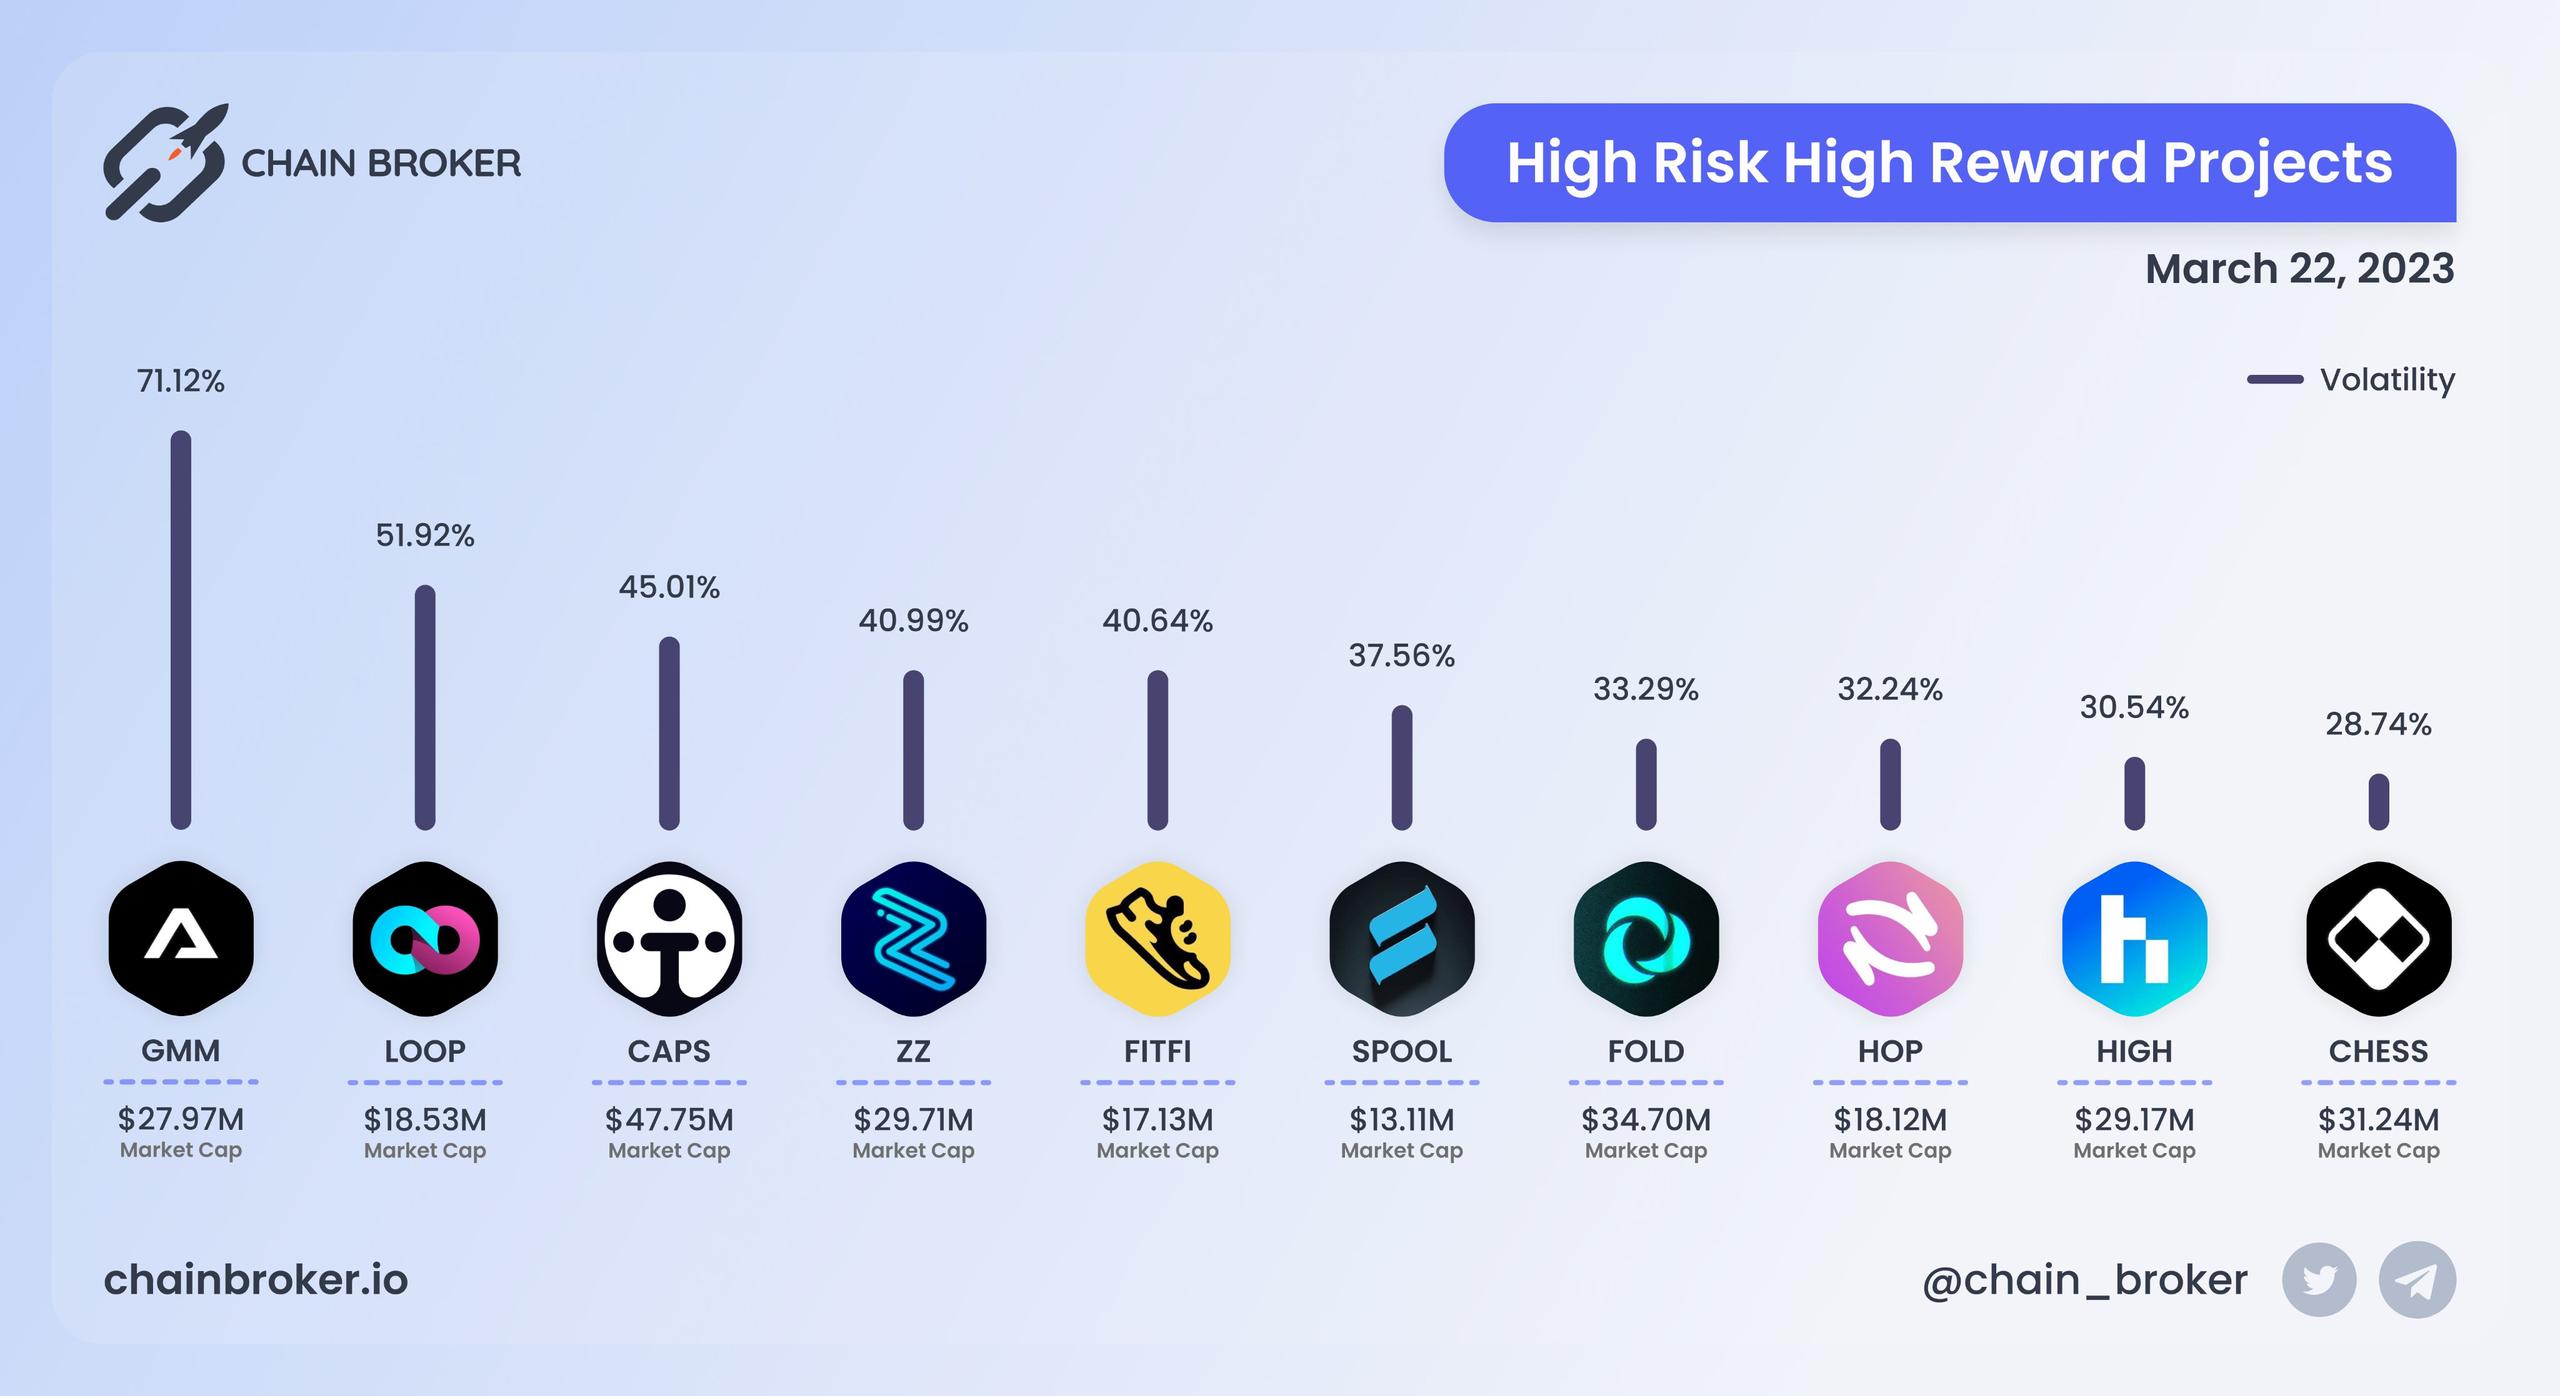 Highest volatility projects